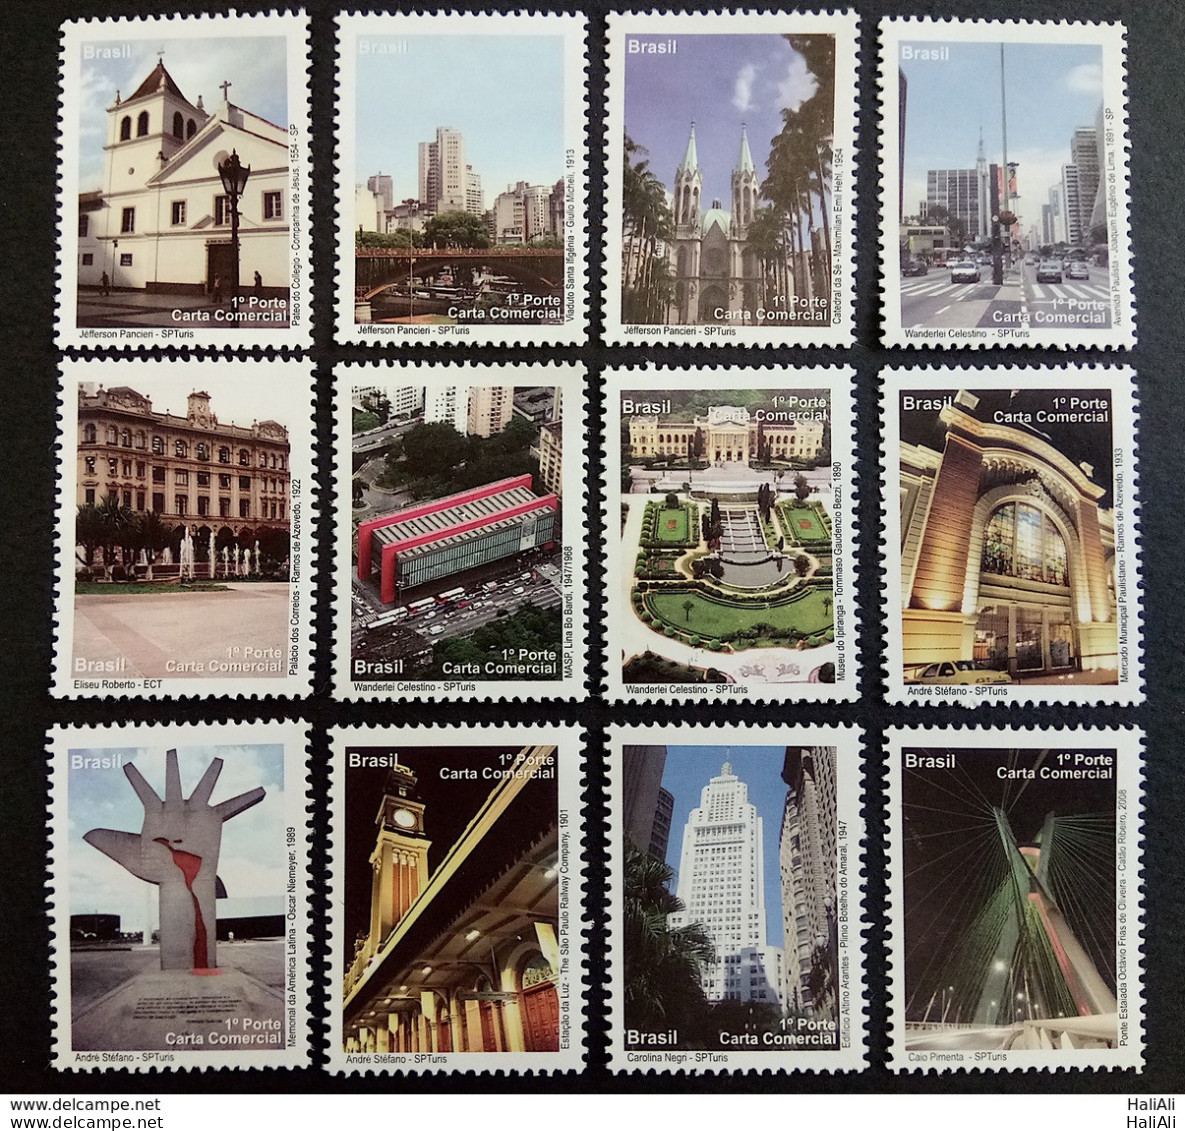 C 2885 Brazil Depersonalized Stamp Tourism Sao Paulo Church Bridge 2009 Vertical Complete Series - Personalized Stamps